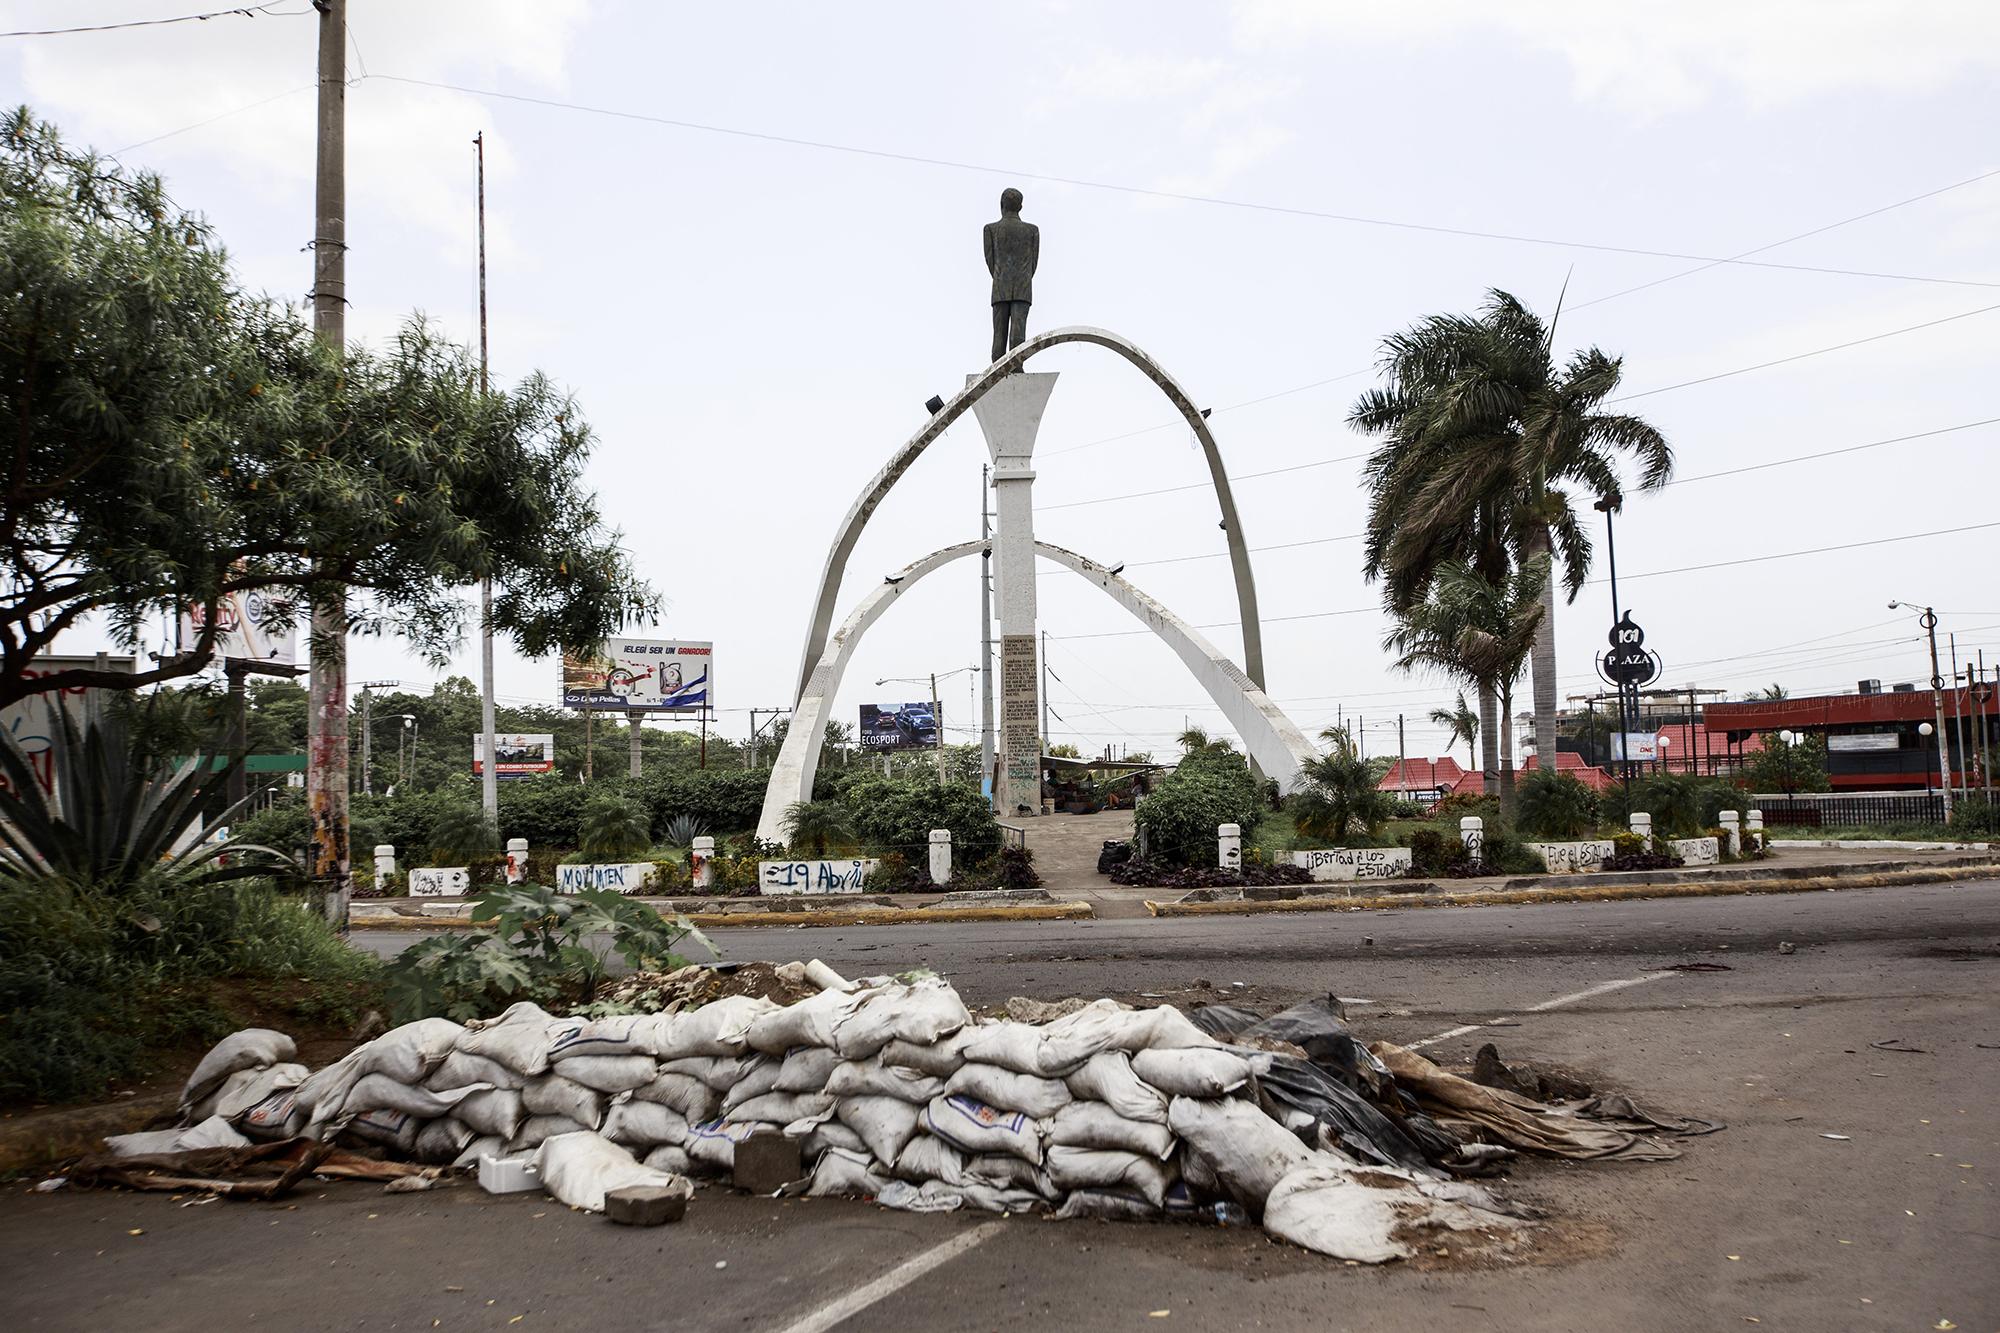 The Rigoberto López Pérez Roundabout near UNAN-Managua became a battlefield between police and students long before the police offensive to clear out the campus on July 13. June 30, 2018.